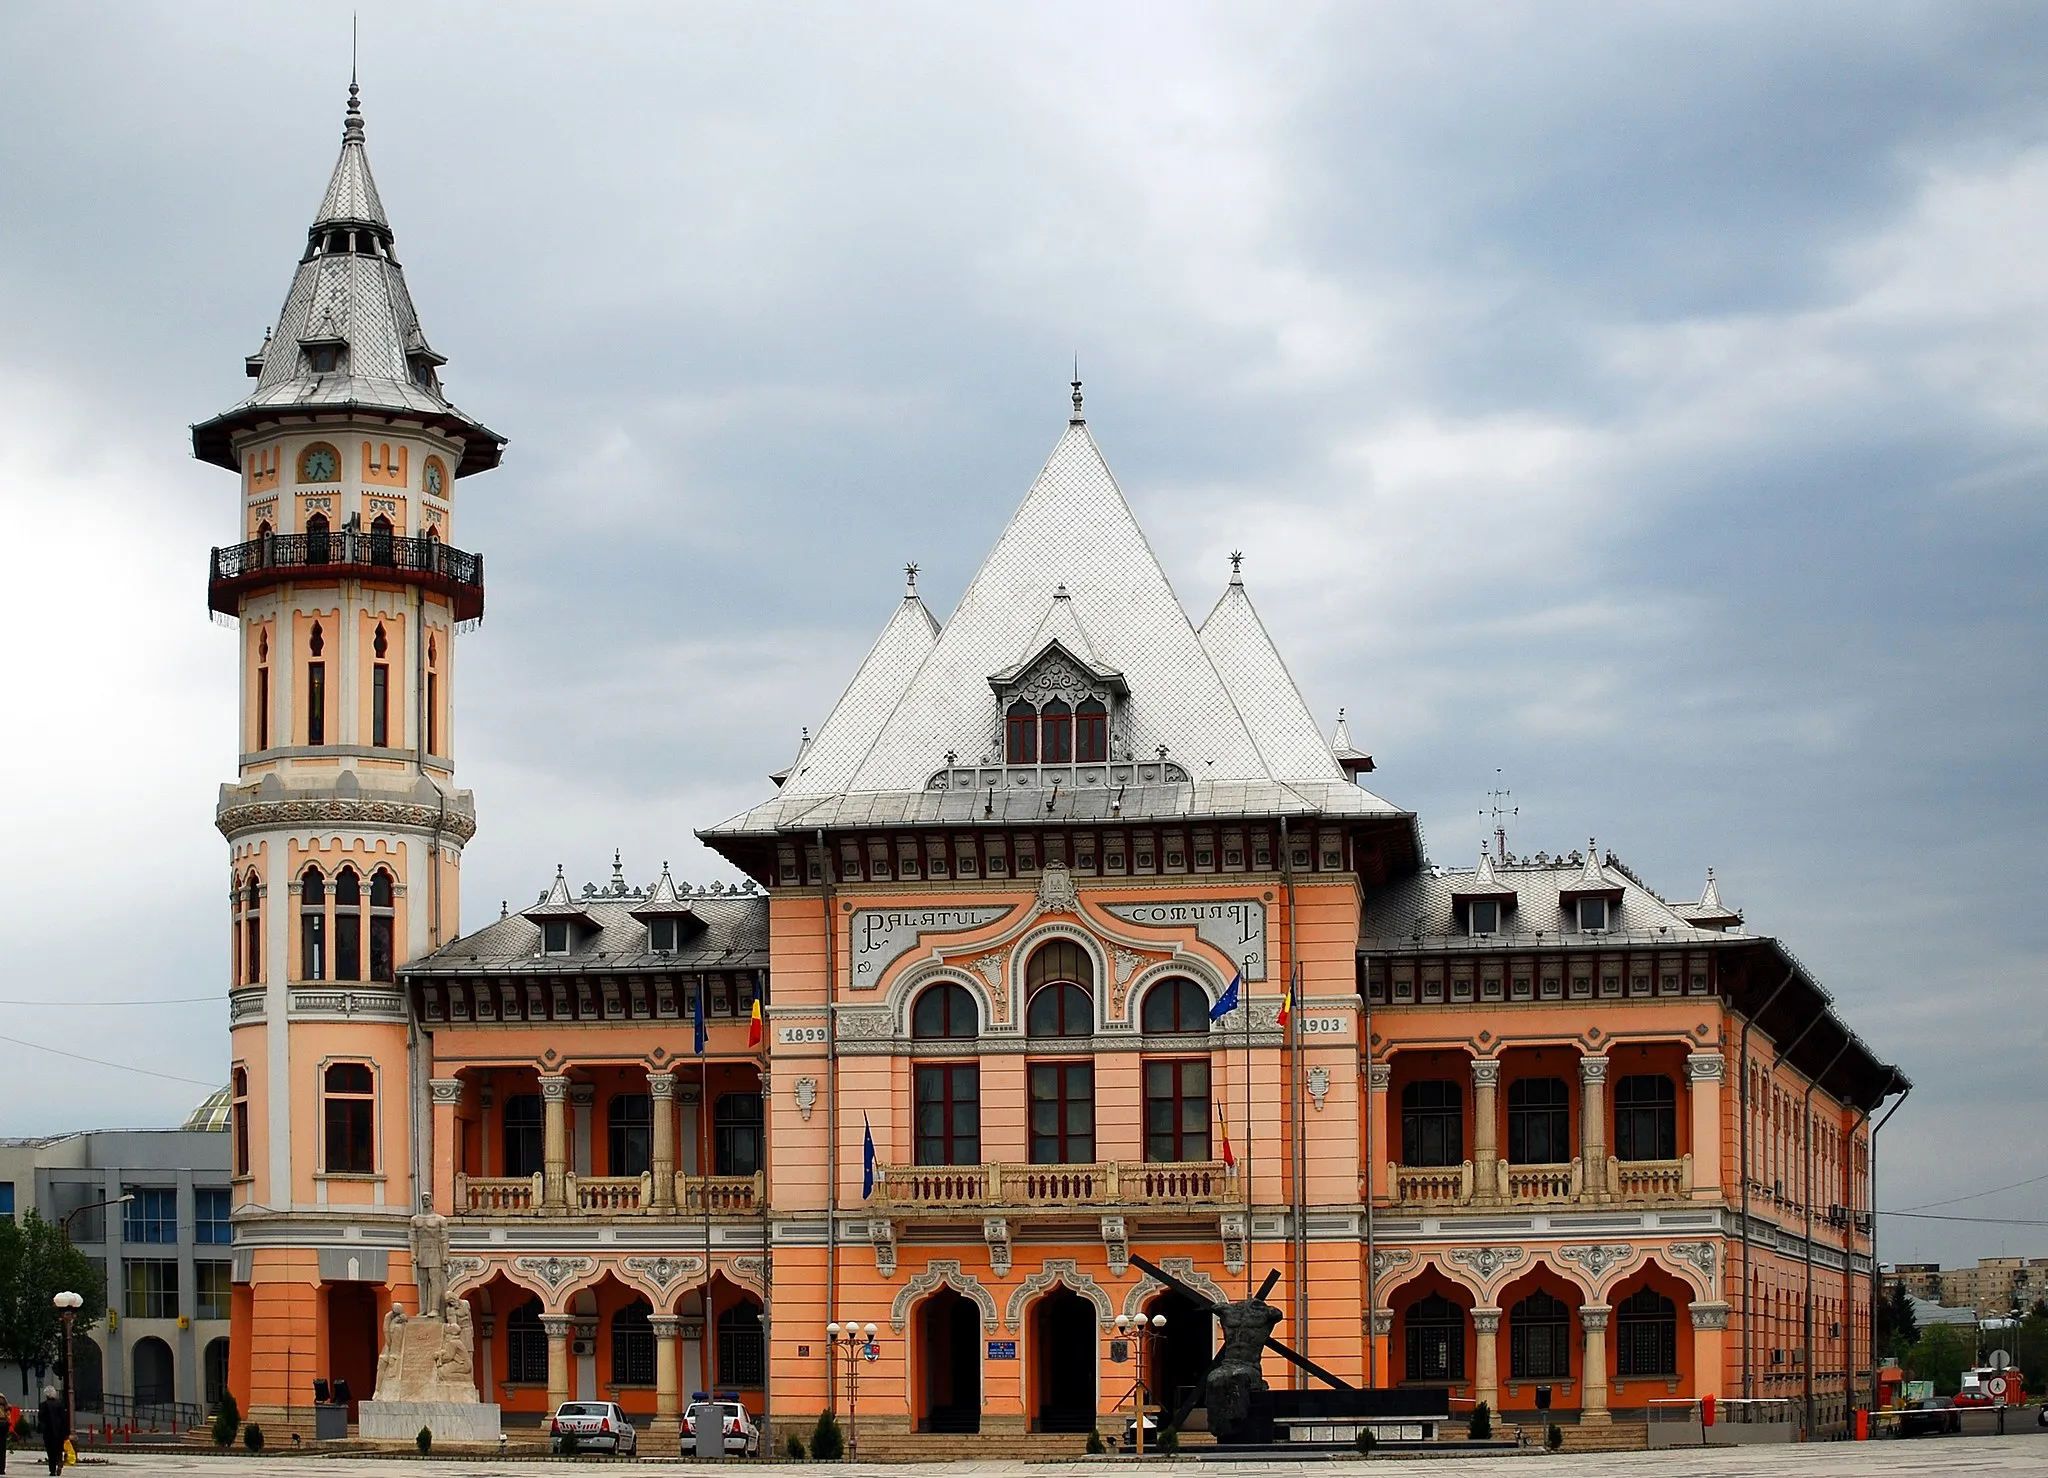 Photo showing: The Communal Palace in Buzău, Romania, with the tower in the Southern corner. The building is Buzău's city hall, built for this purpose between 1899 and 1903, after the design of Romanian architect Alexandru Săvulescu. This picture shows the Communal Palace facade, seen from the South-East, from the Dacia Square